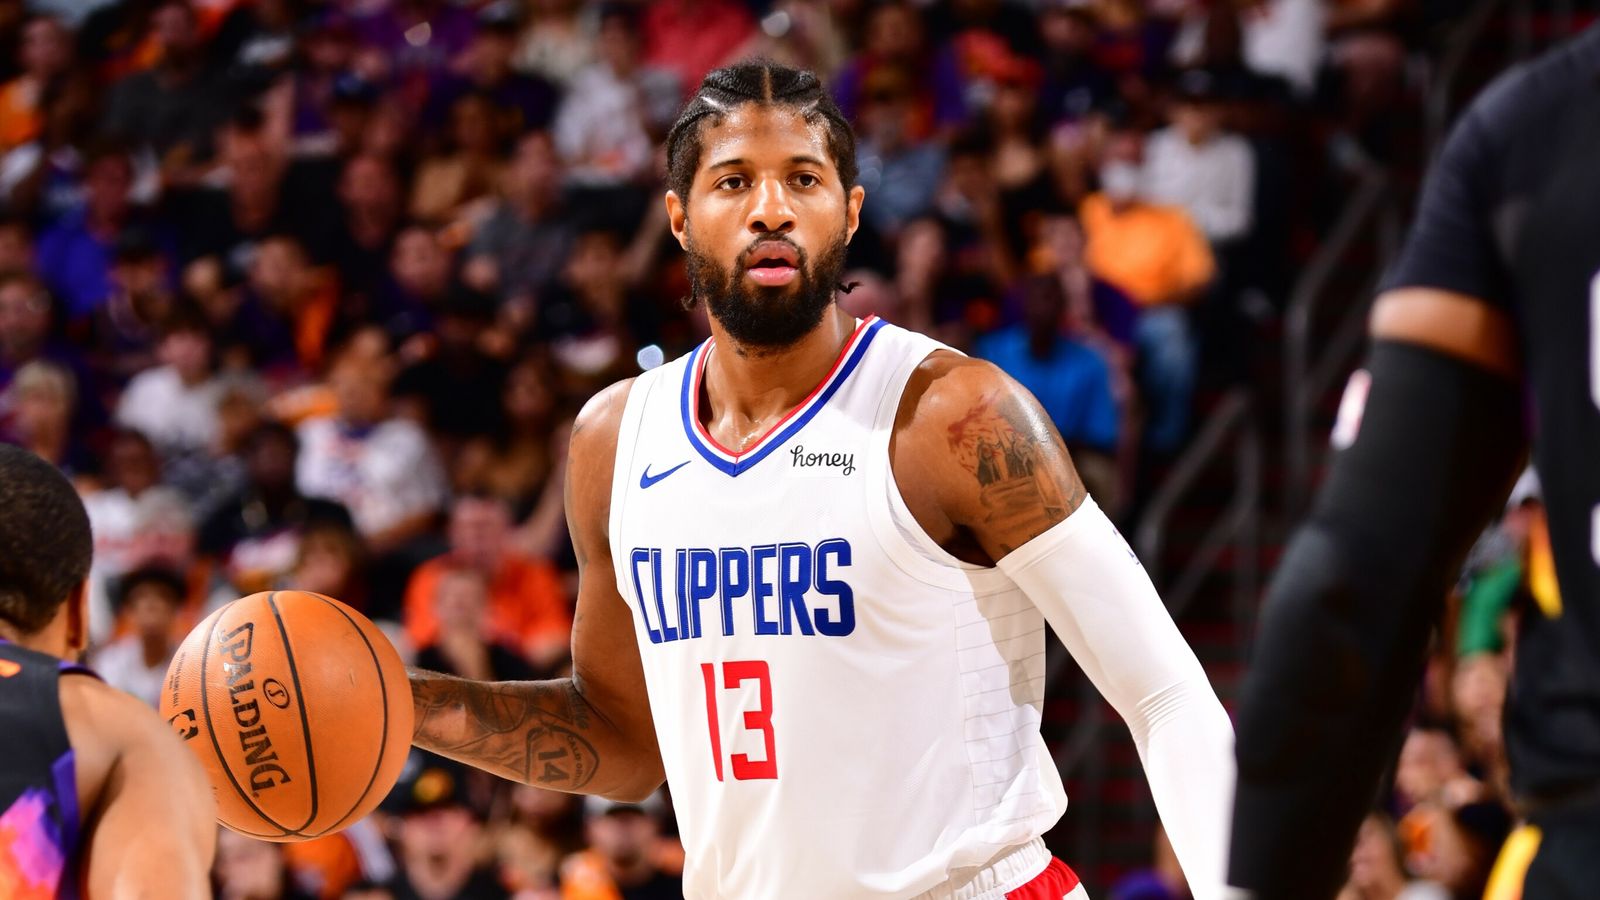 Paul George's 41 points keep Los Angeles Clippers alive vs Phoenix